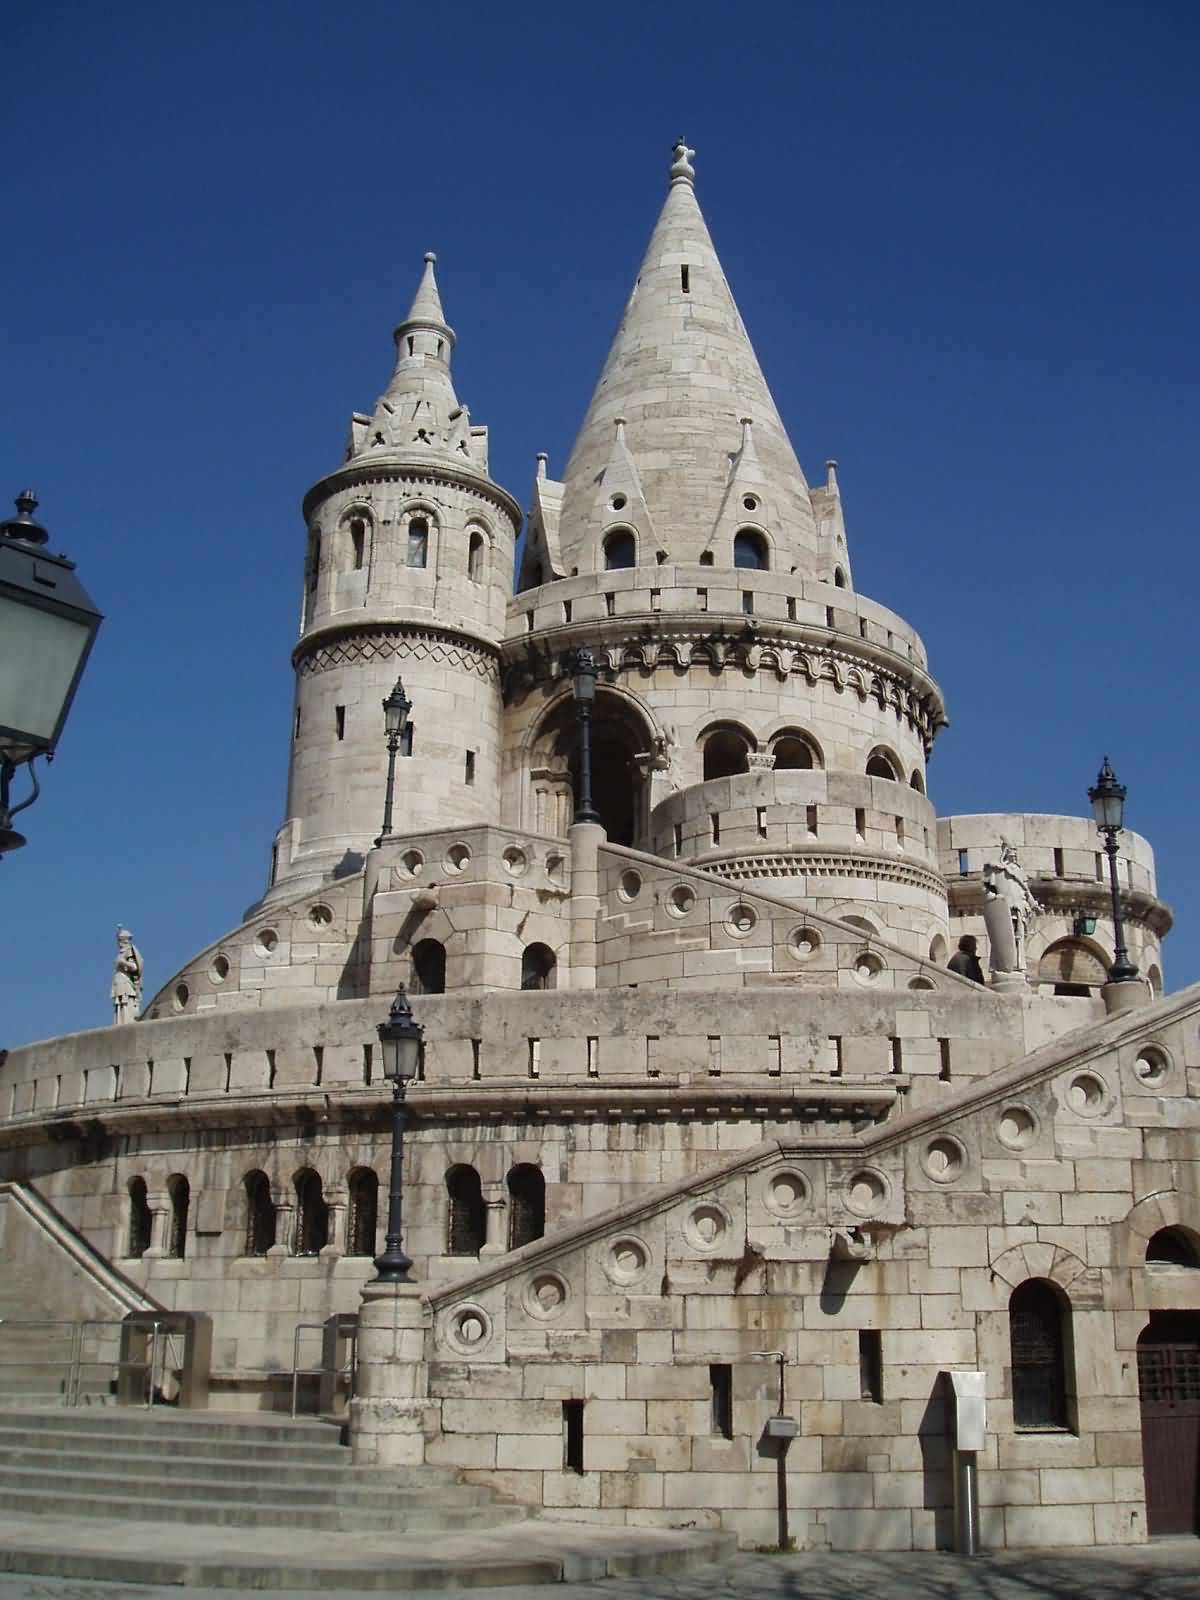 Amazing Picture Of The Fisherman's Bastion